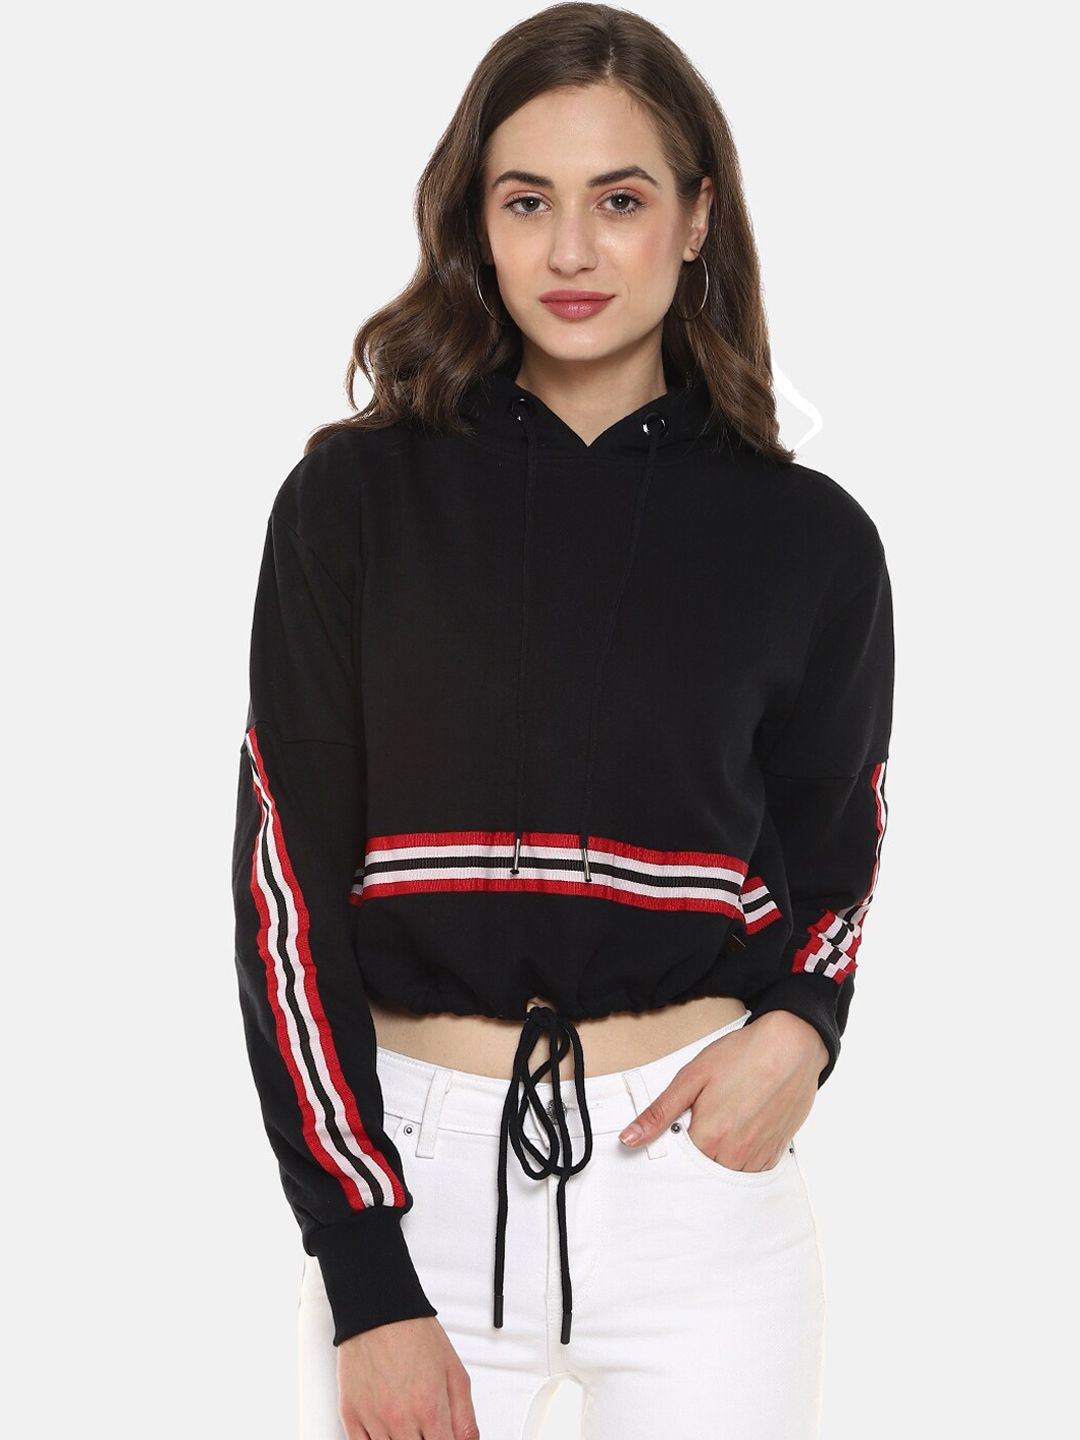 Campus Sutra Women Black & Red Striped Cotton Hooded Sweatshirt Price in India